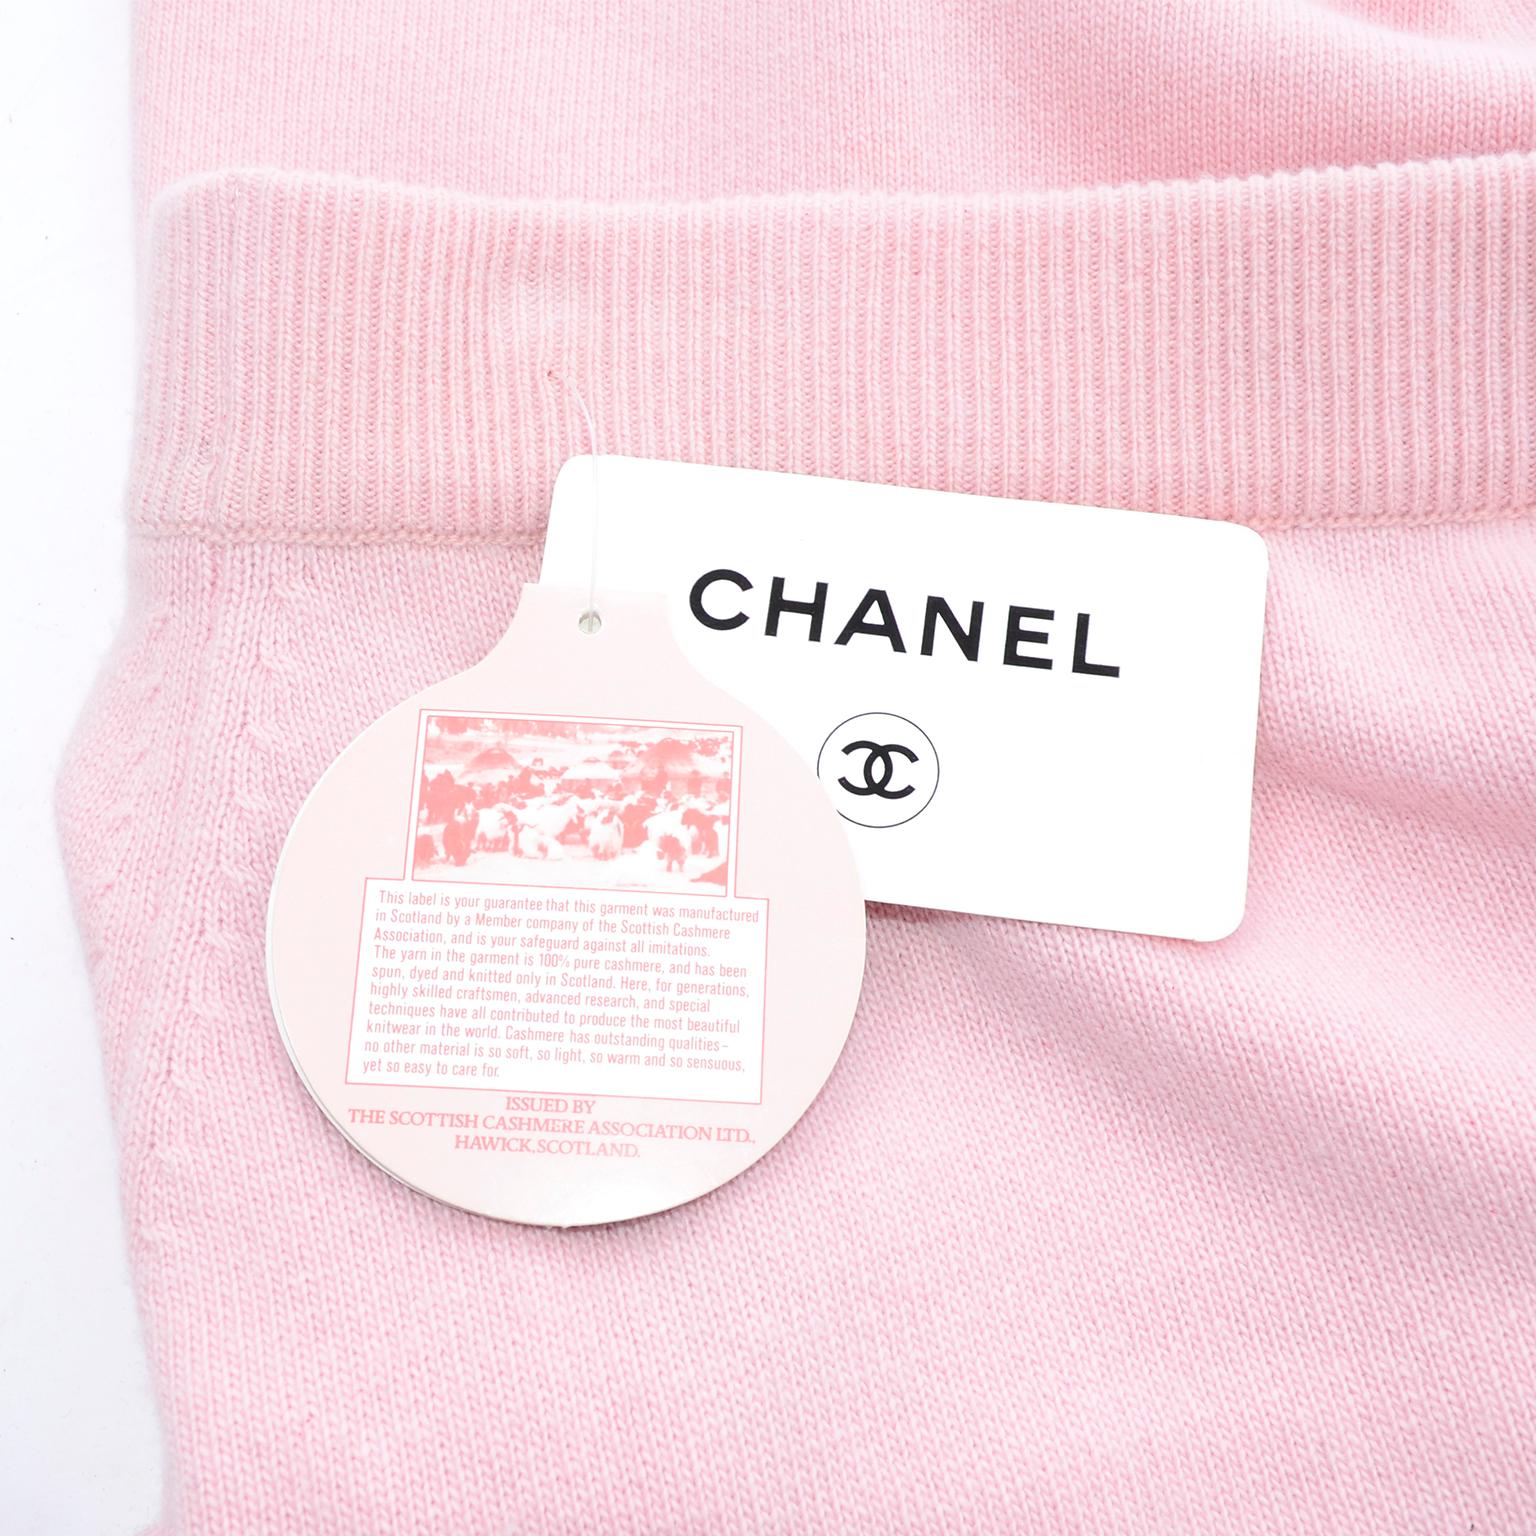 1988 Chanel Runway Vintage Pink Cashmere Skirt & Sweater Top 2 pc W/Tag 5